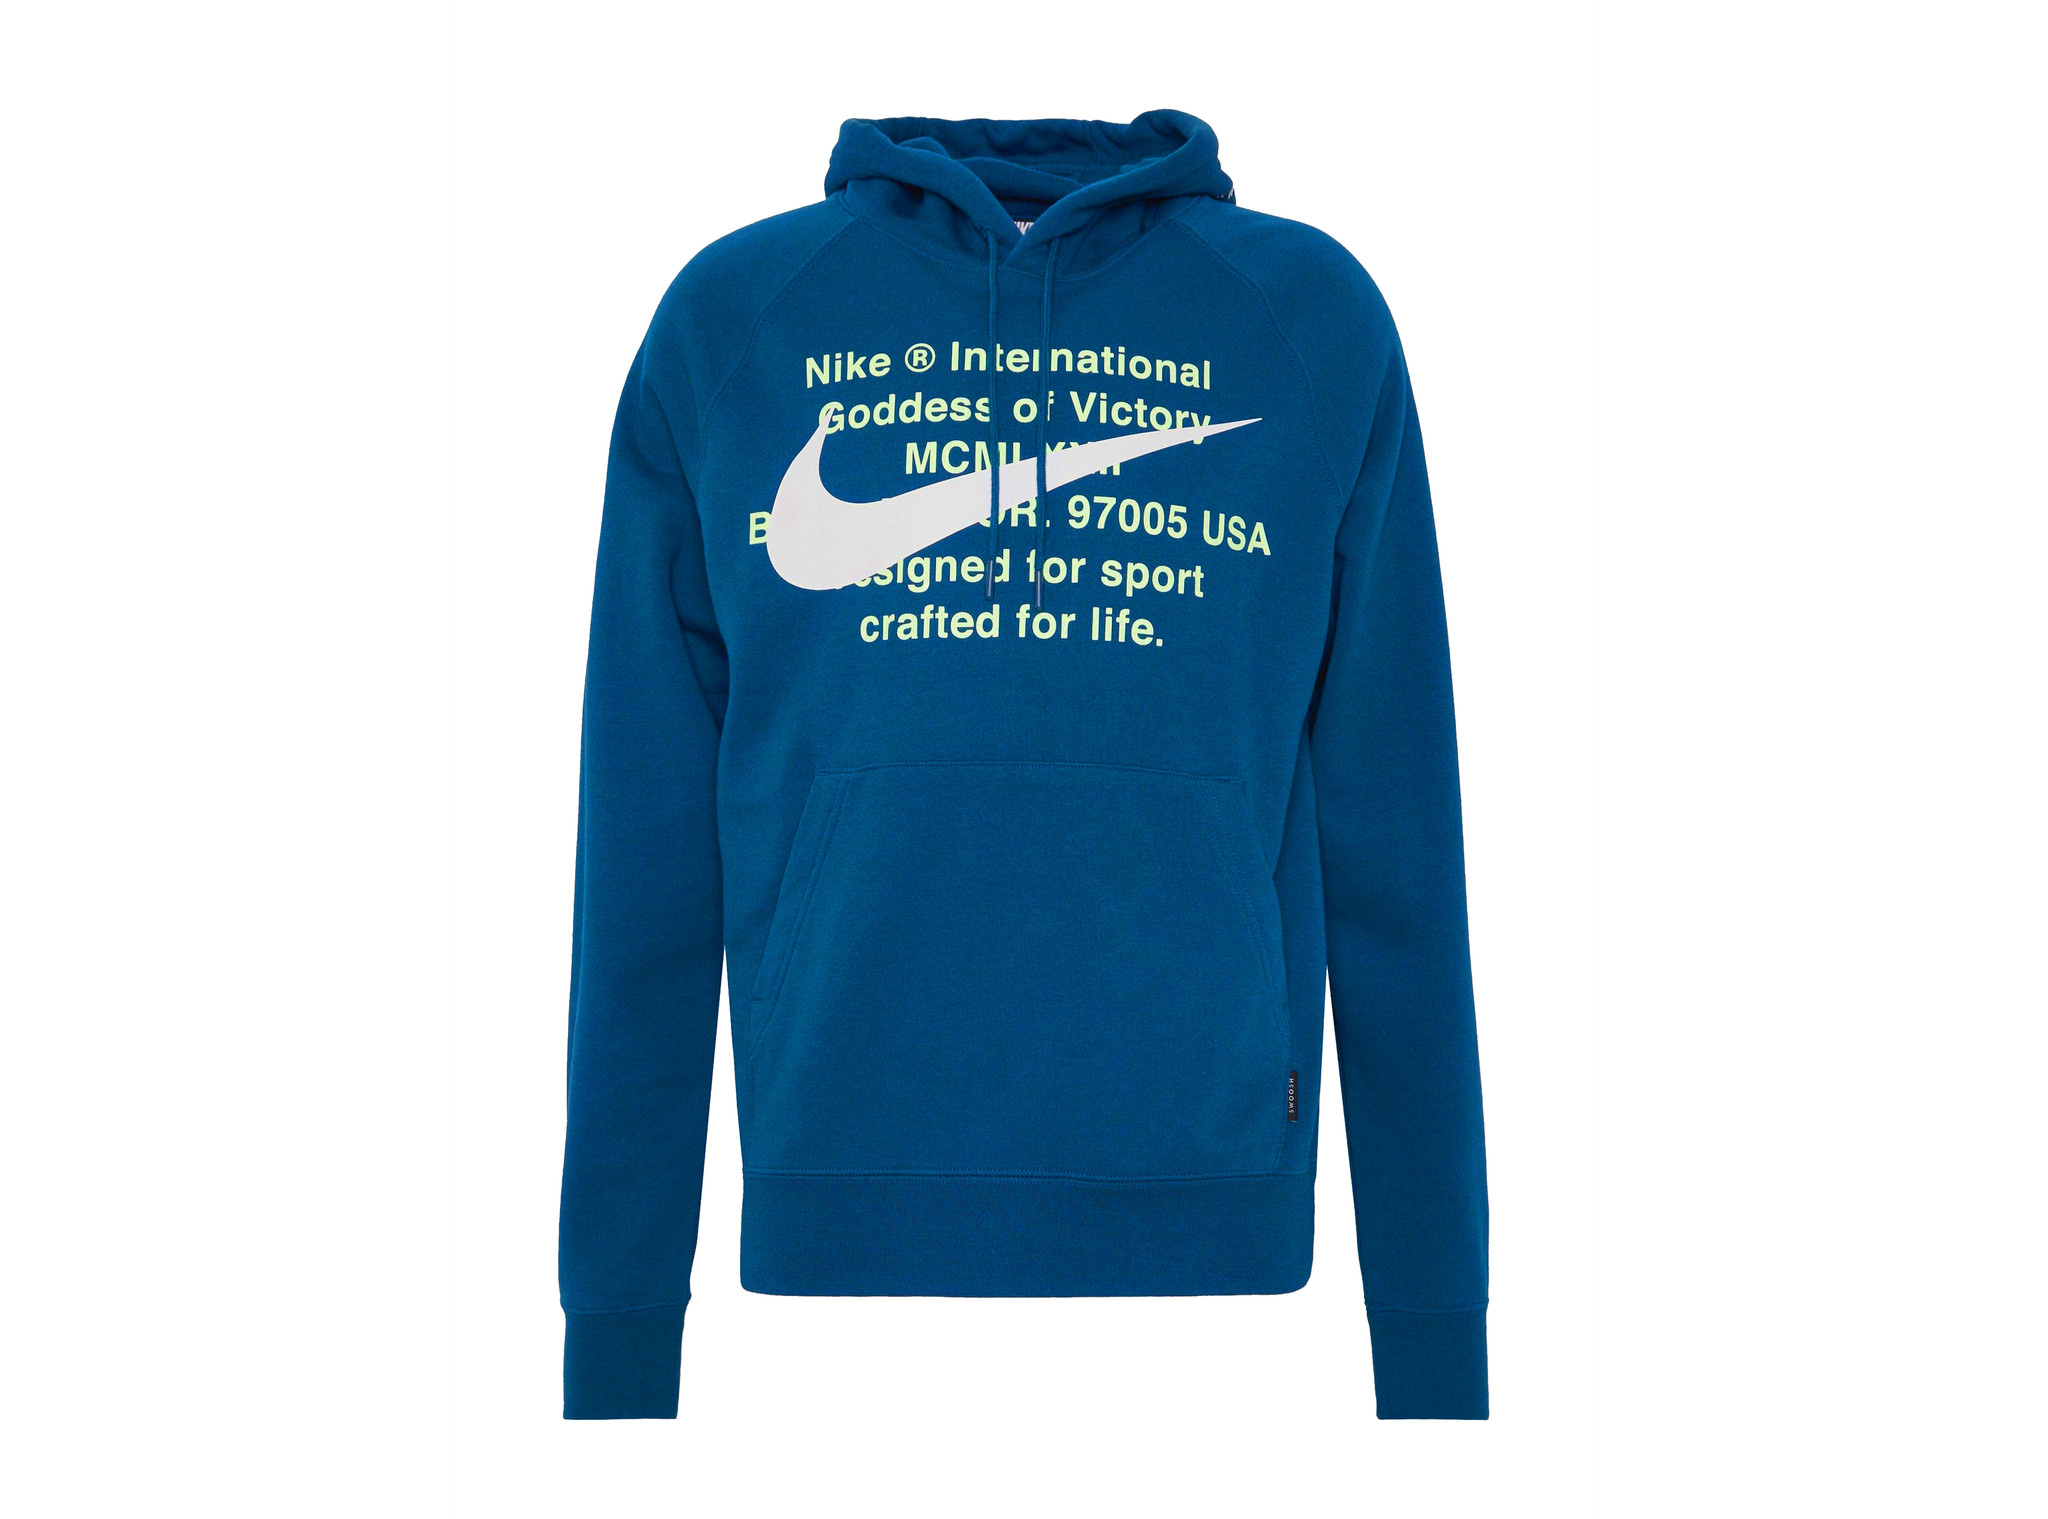 Nike Men's Swoosh French Terry Hoodie - image 1 of 2